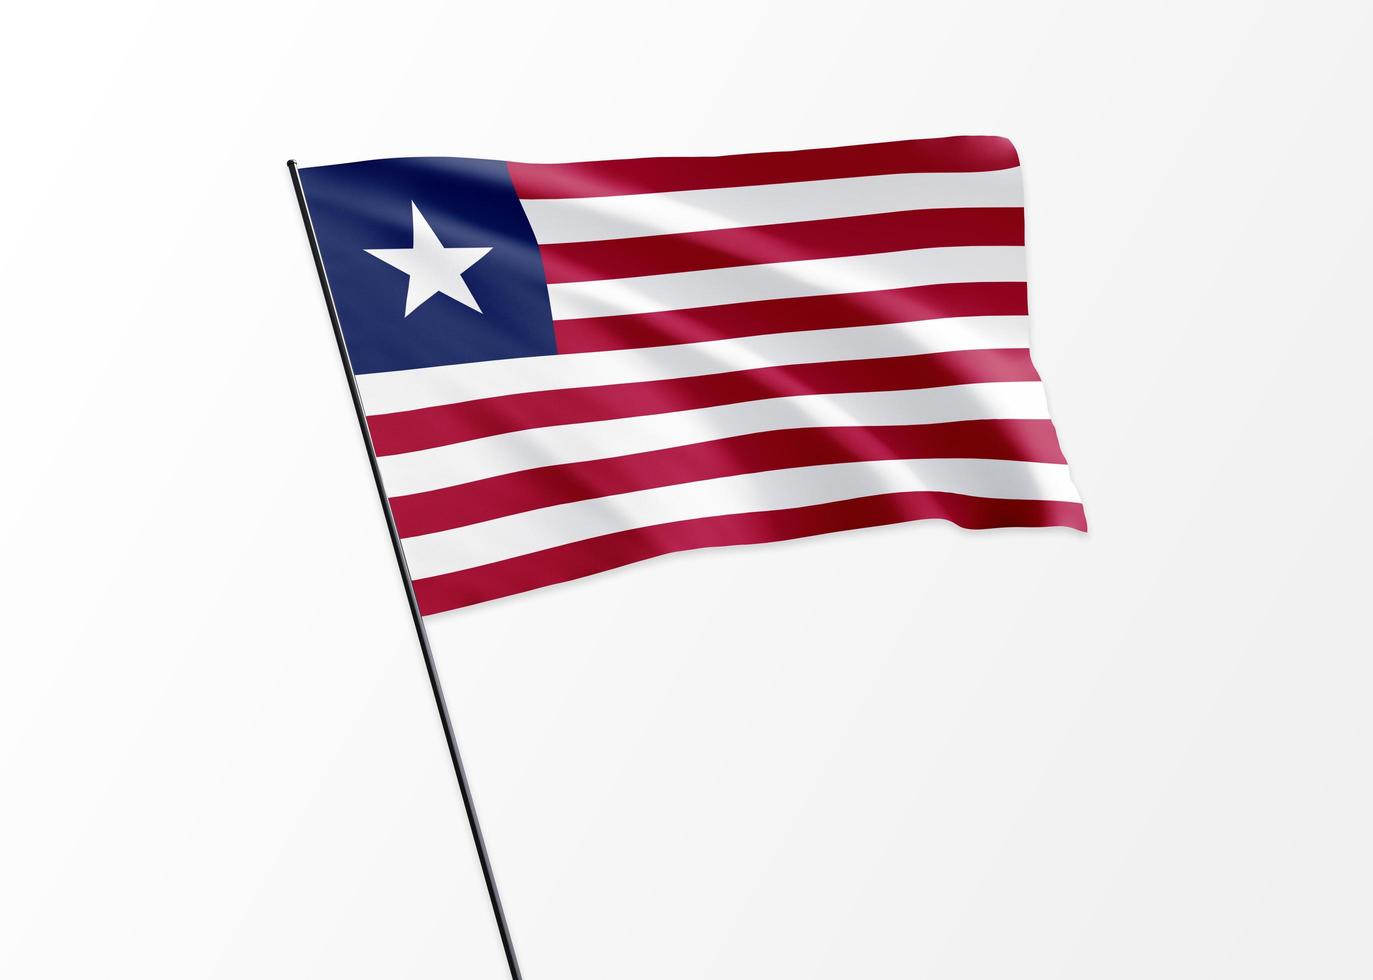 Liberia flag flying high in the isolated background Liberia independence day photo